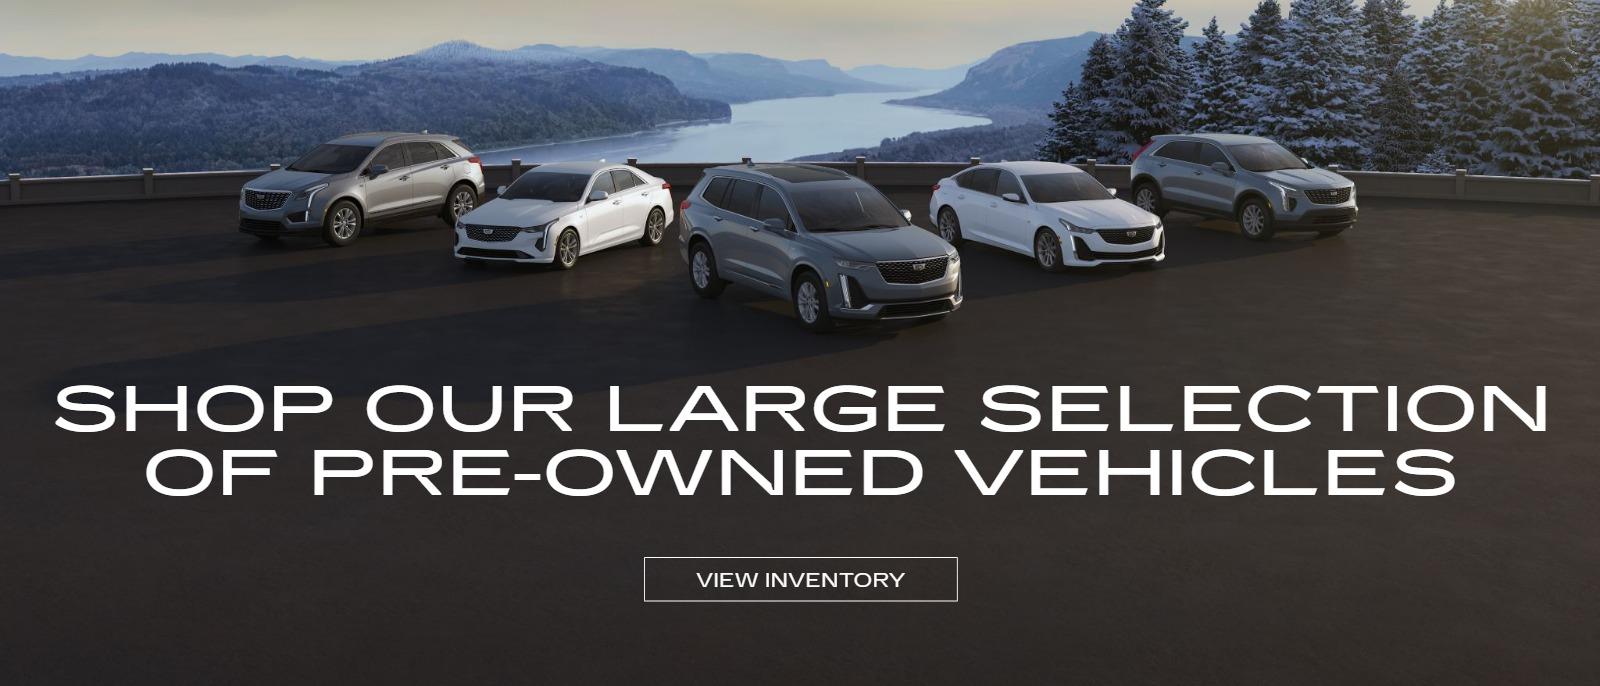 Shop our large selection of Pre-owned vehicle